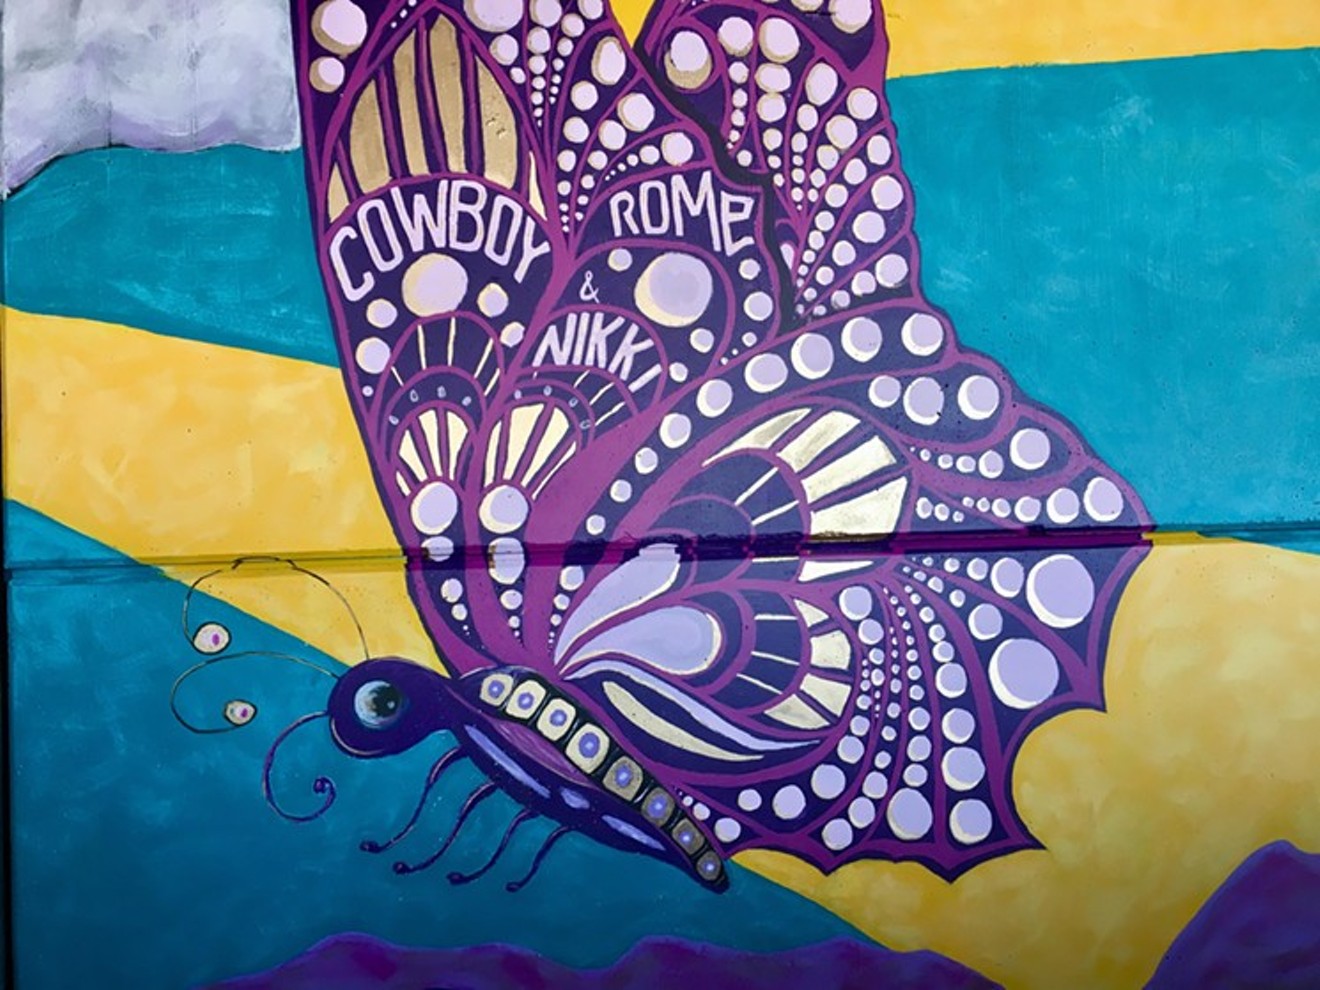 Robin Kniech commissioned a mural commemorating three victims of an August triple homicide.